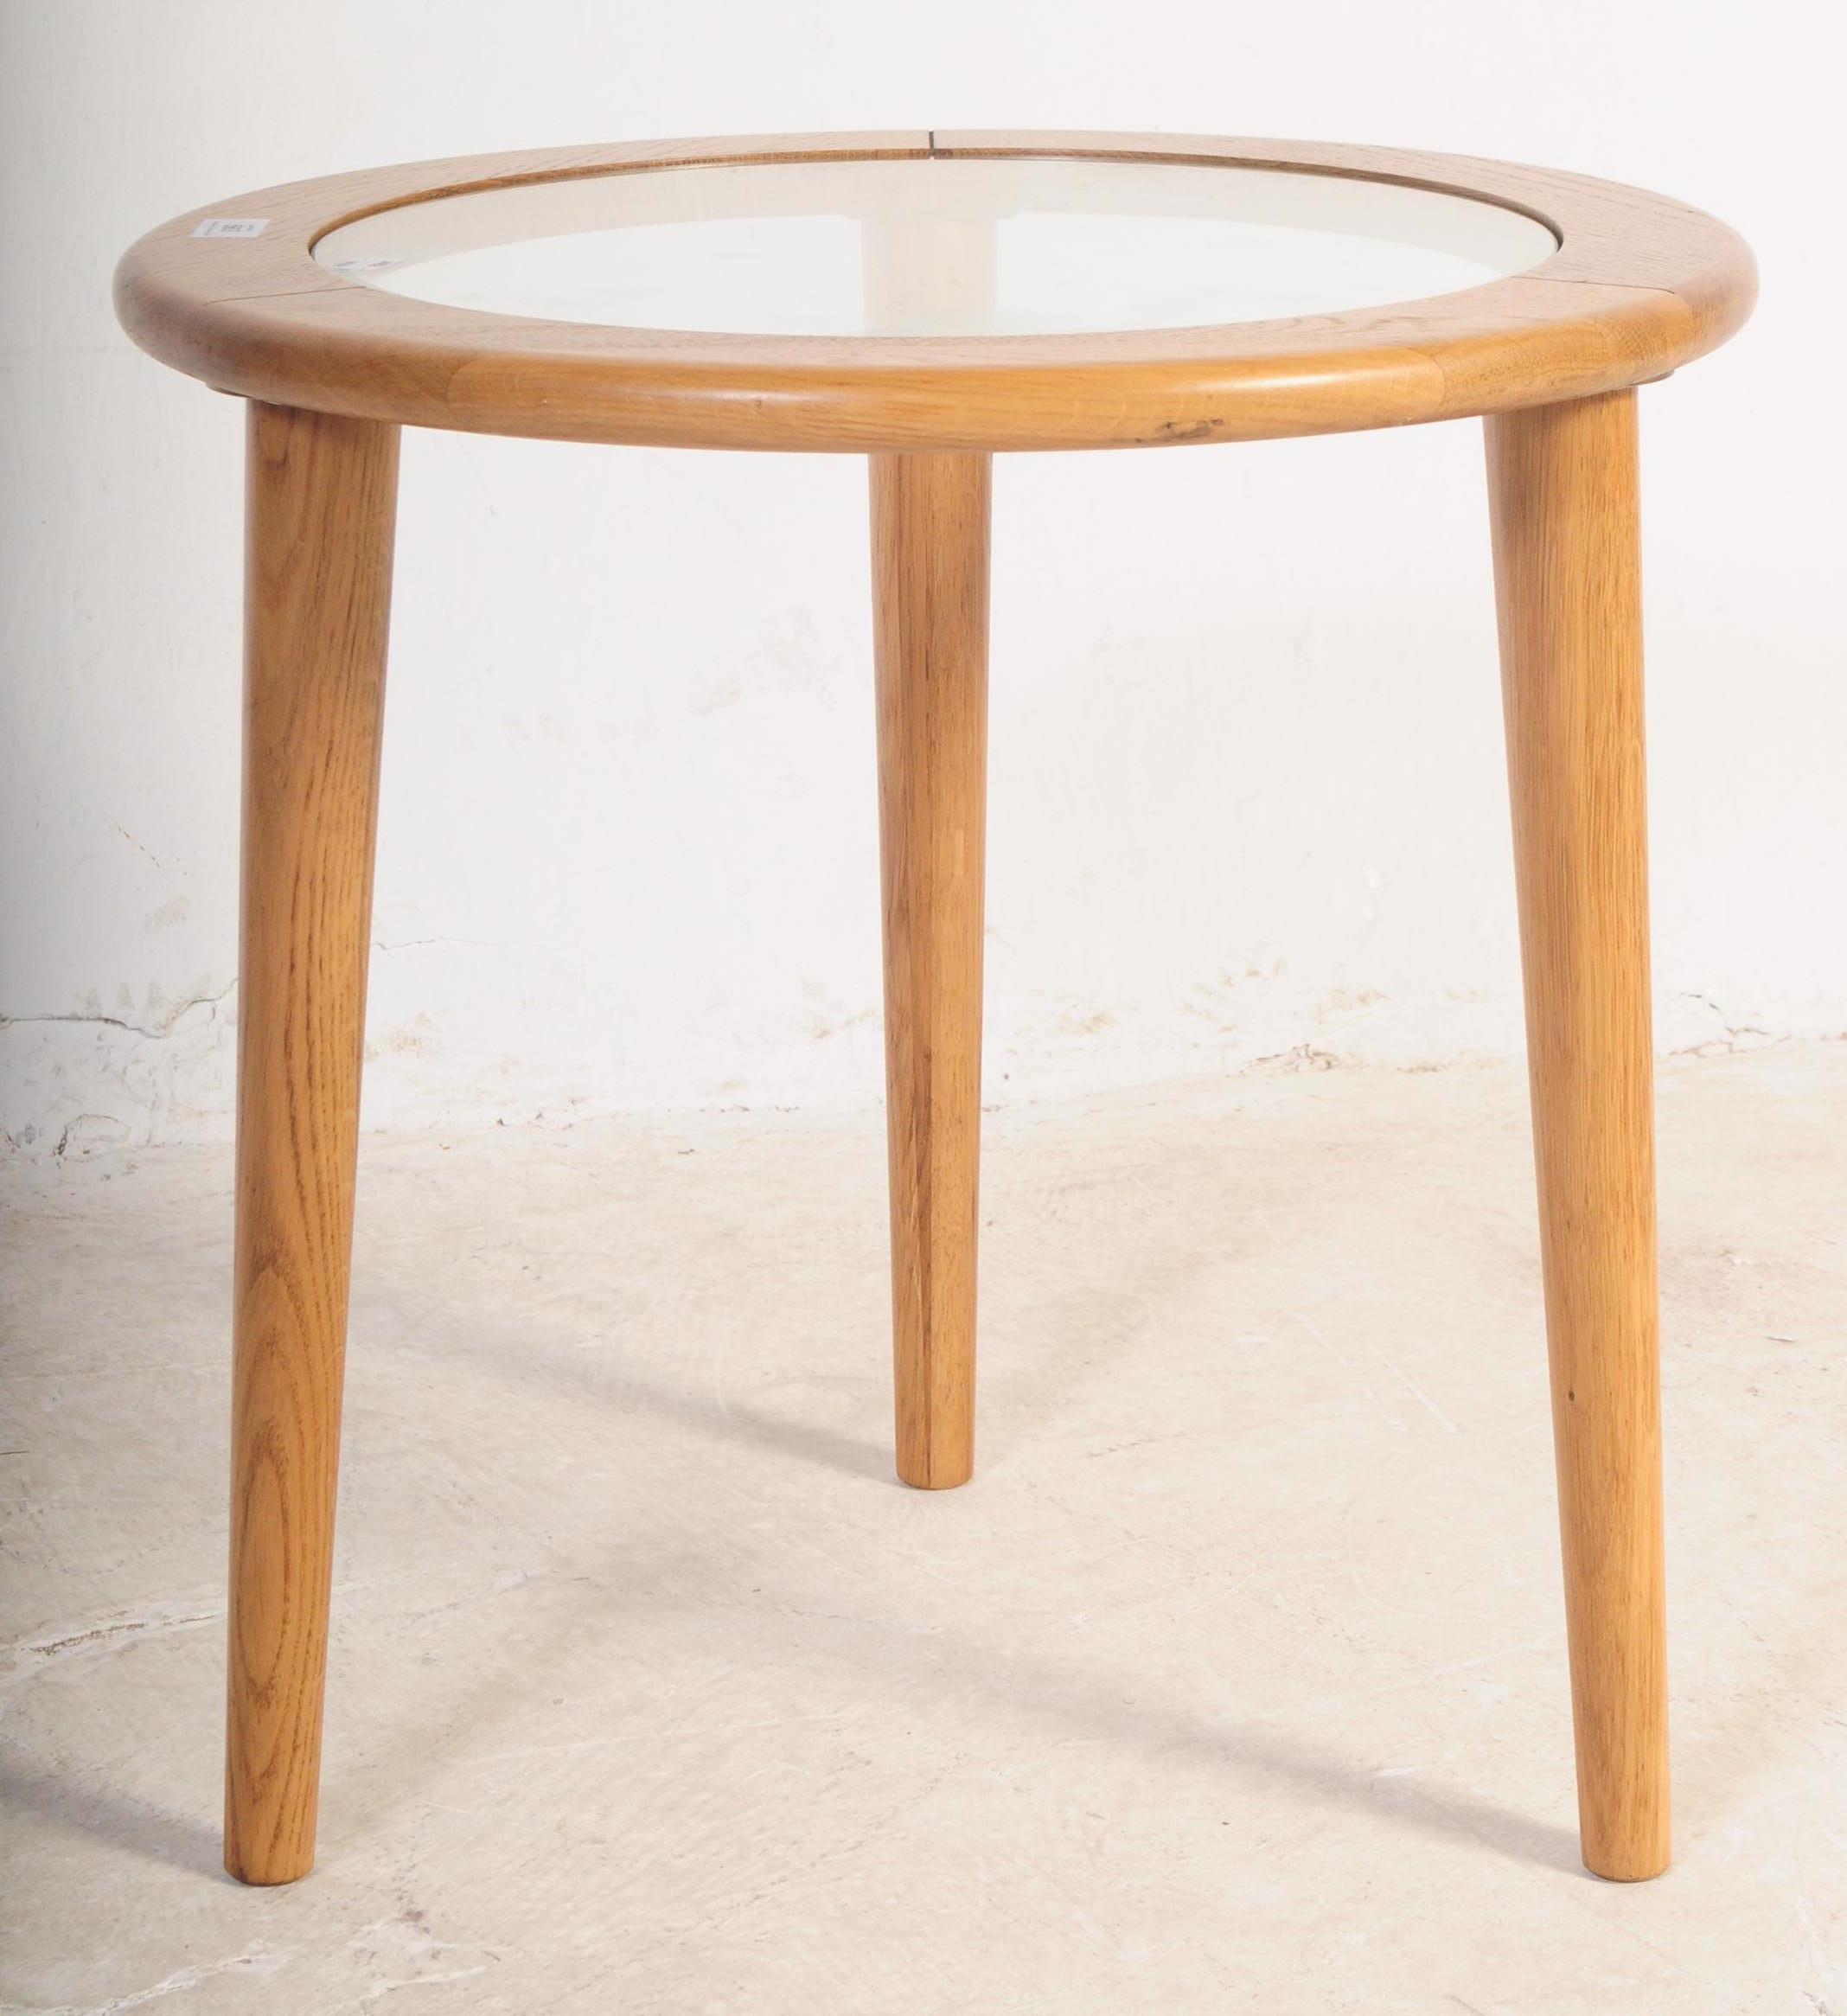 CONTEMPORARY OCCASIONAL GLASS & WOOD CIRCULAR TABLE - Image 2 of 5